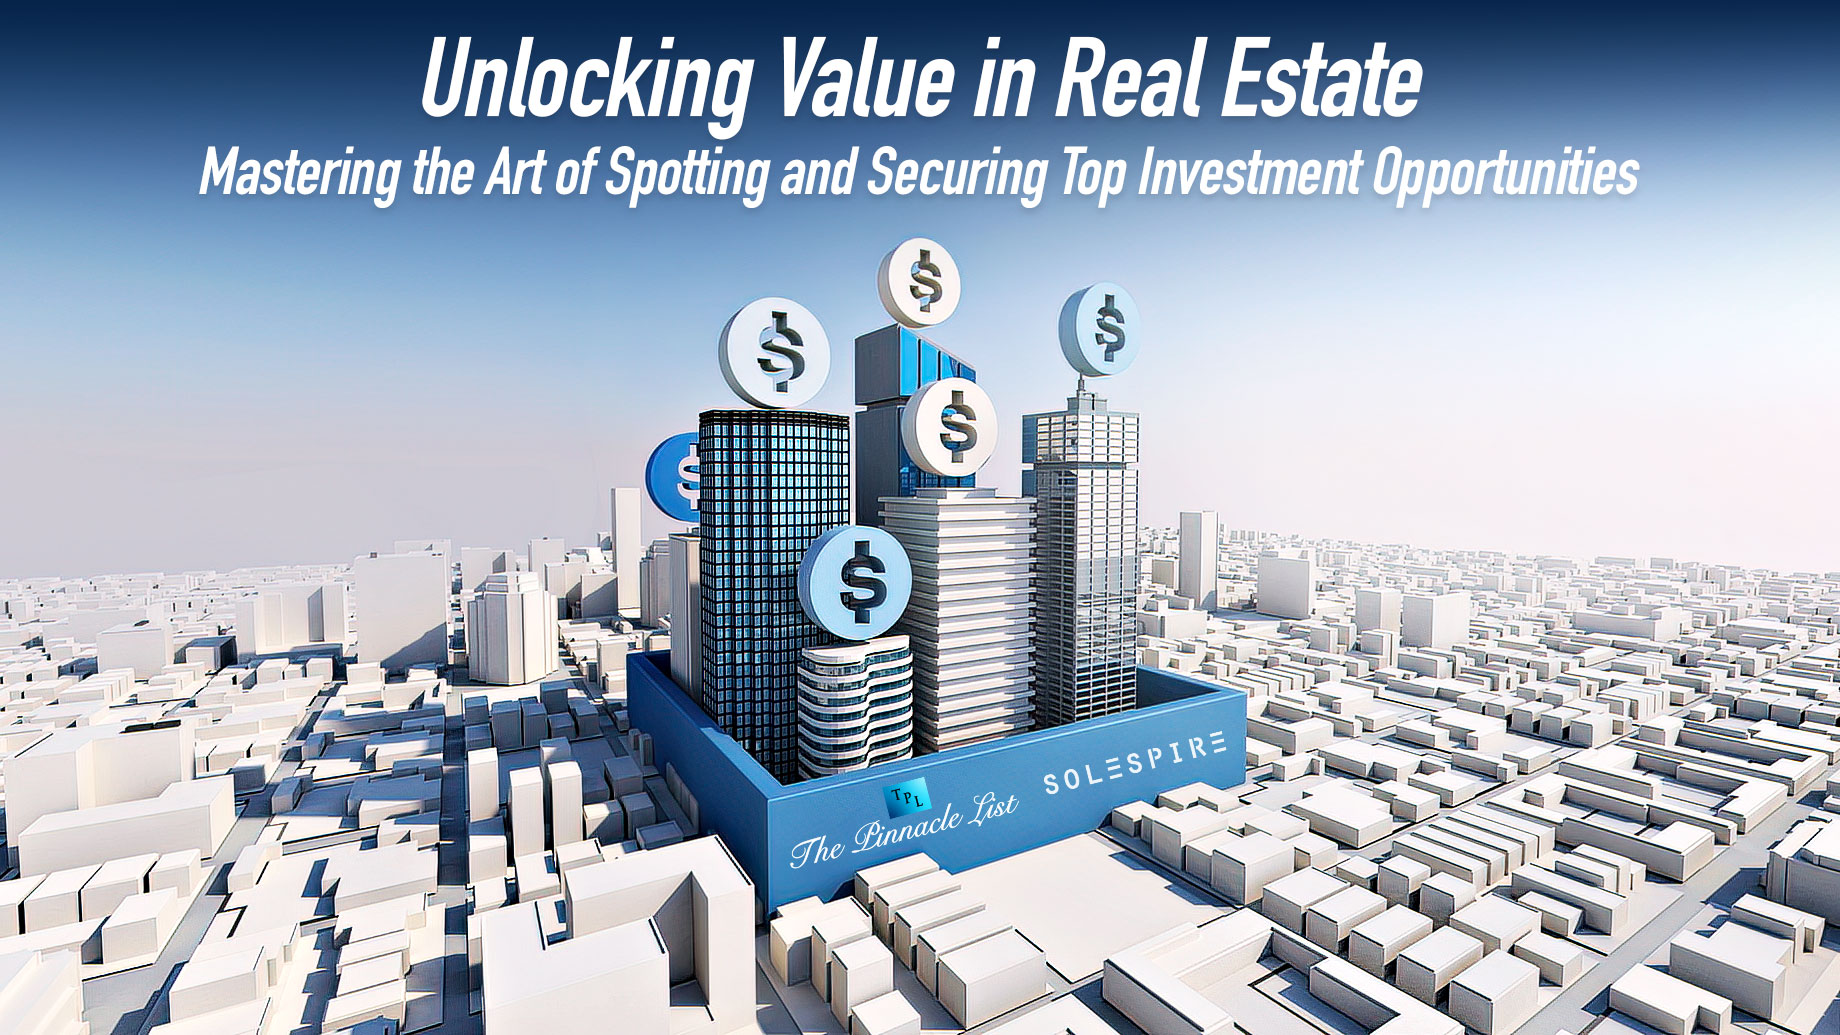 Unlocking Value in Real Estate: Mastering the Art of Spotting and Securing Top Investment Opportunities